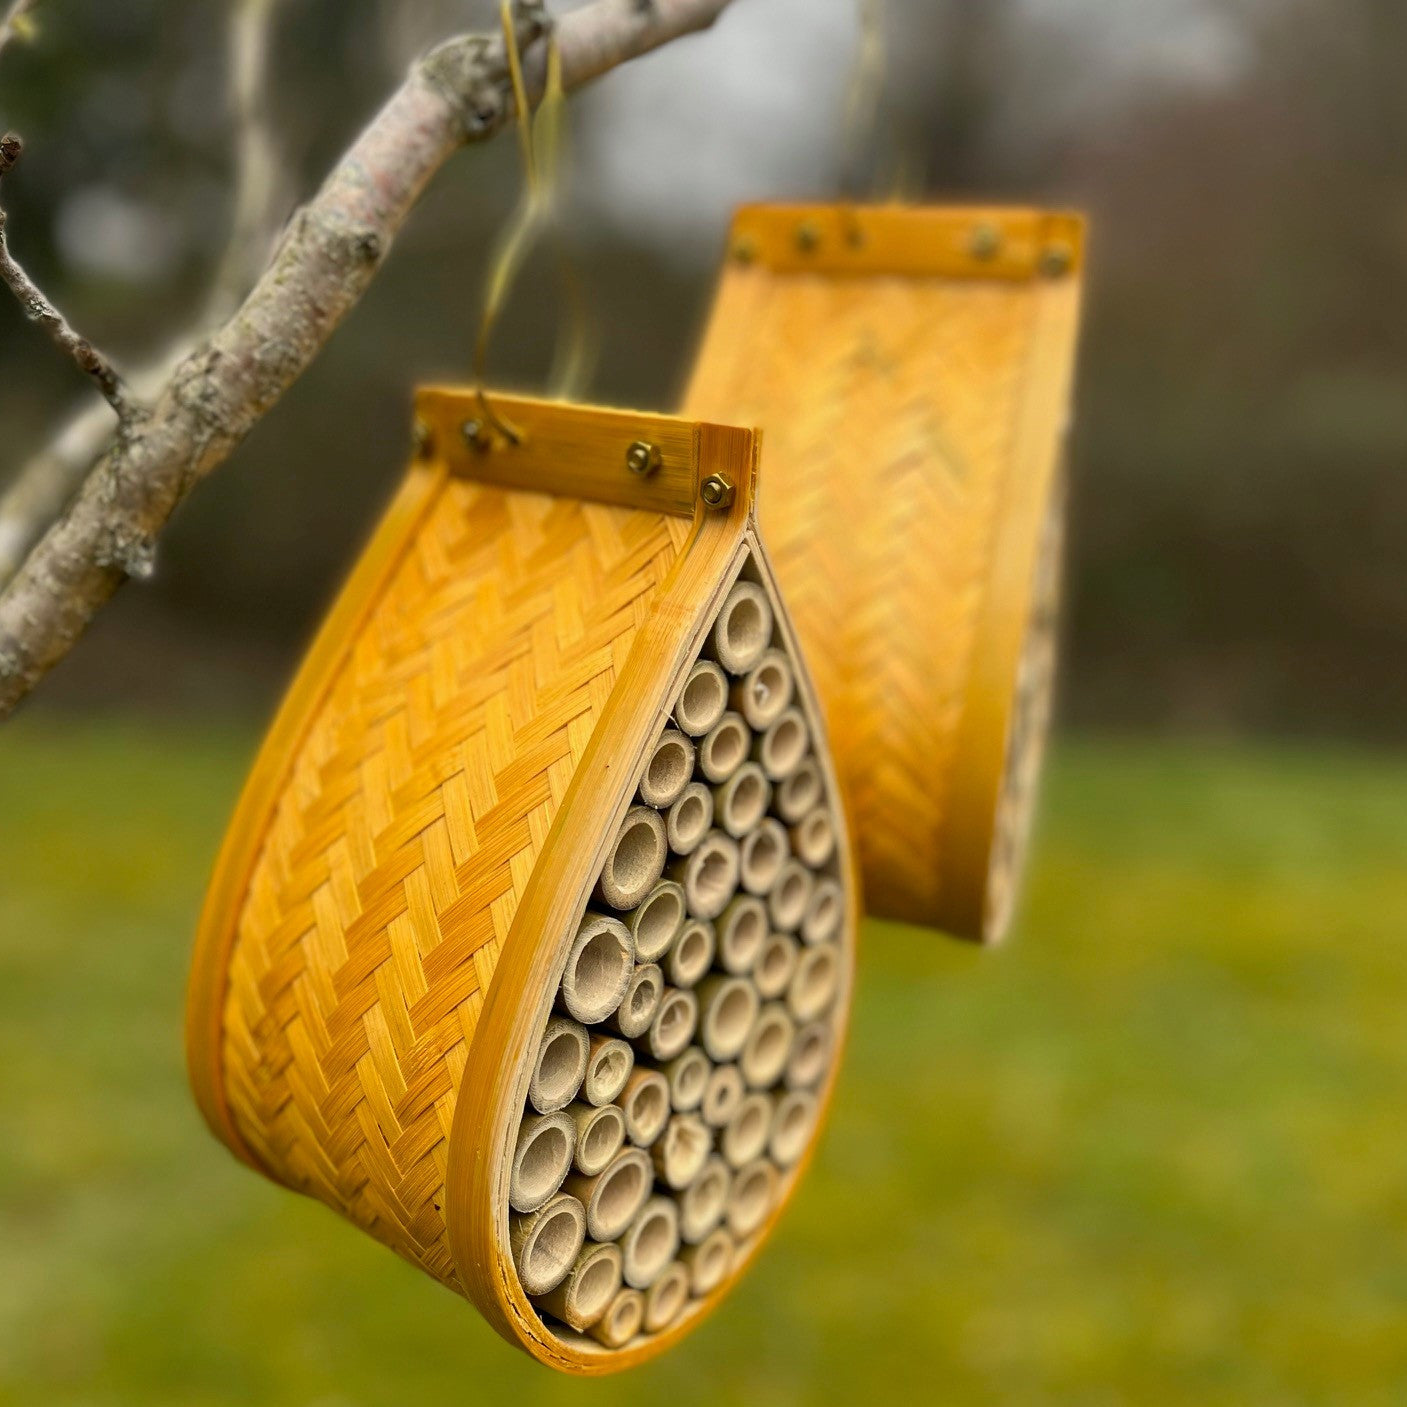 Hanging Teardrop Insect Hotel (Set of 2)